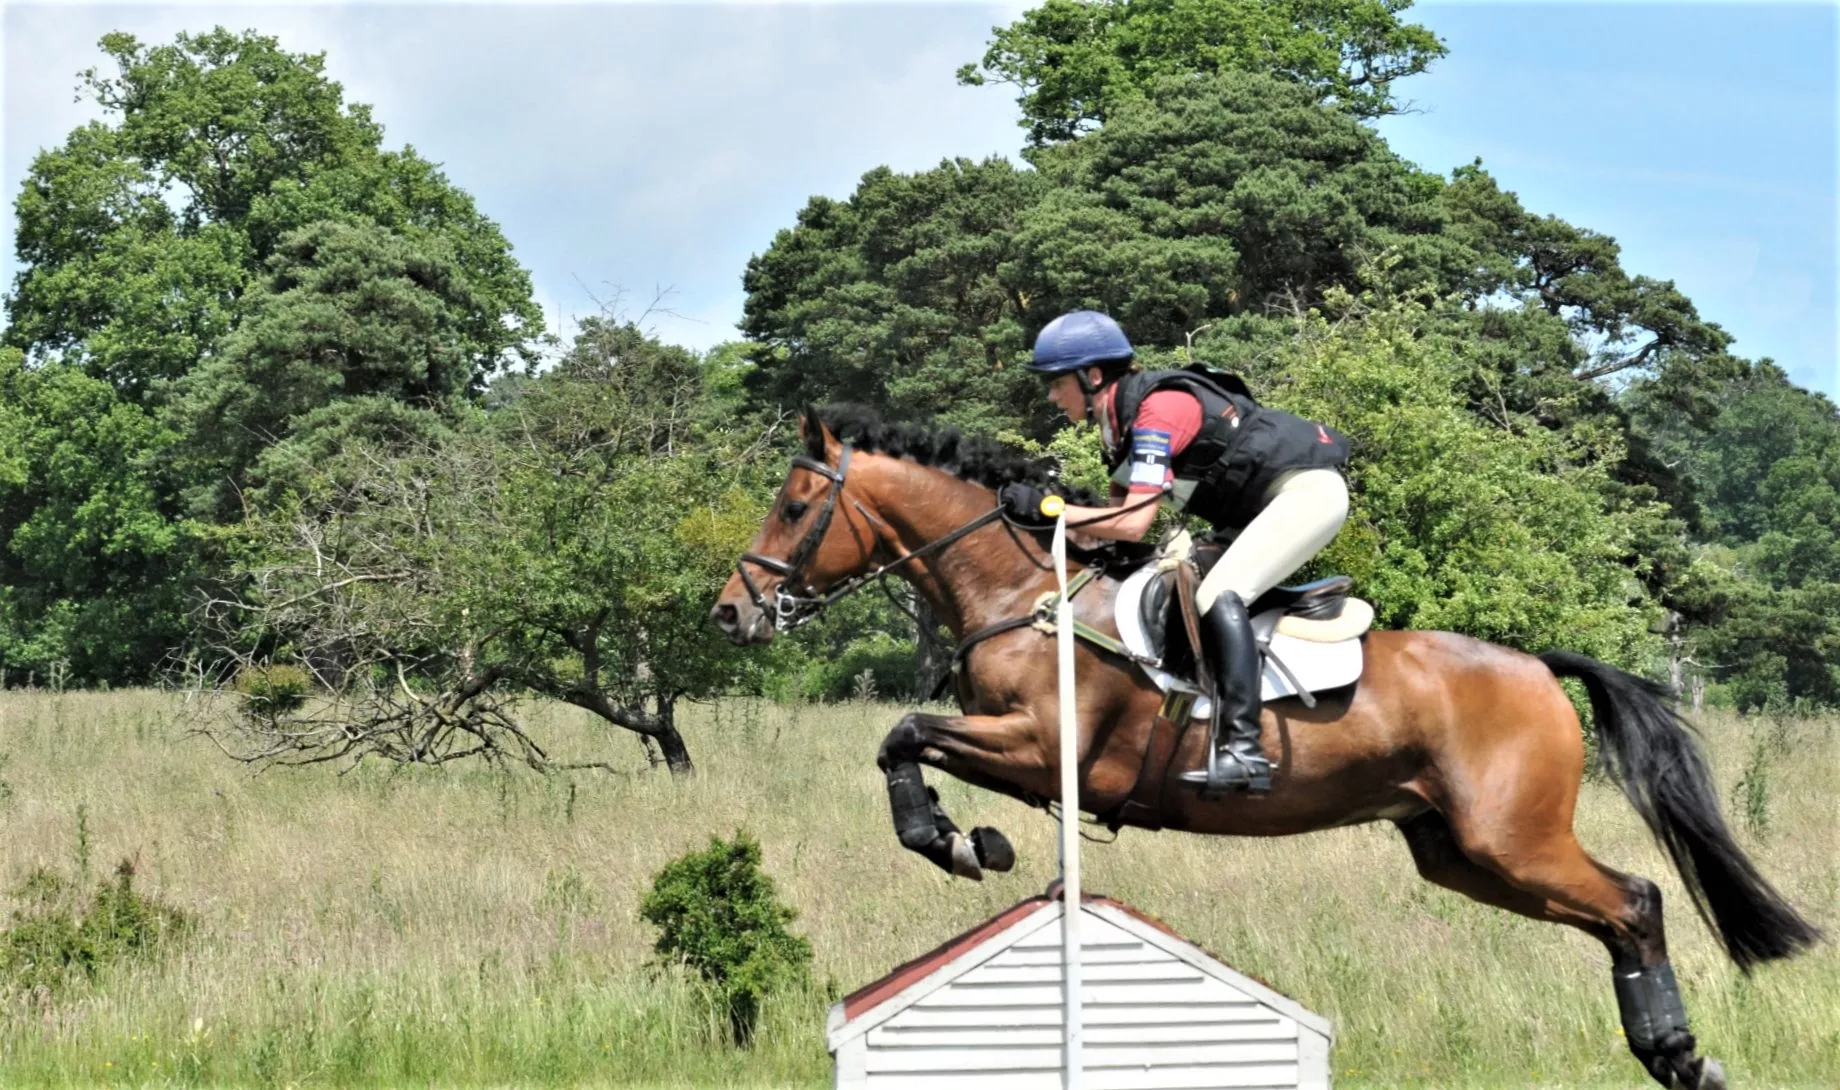 New Muthaiga Horse Riding Stables in Kenya, Africa | Horseback Riding - Rated 0.9